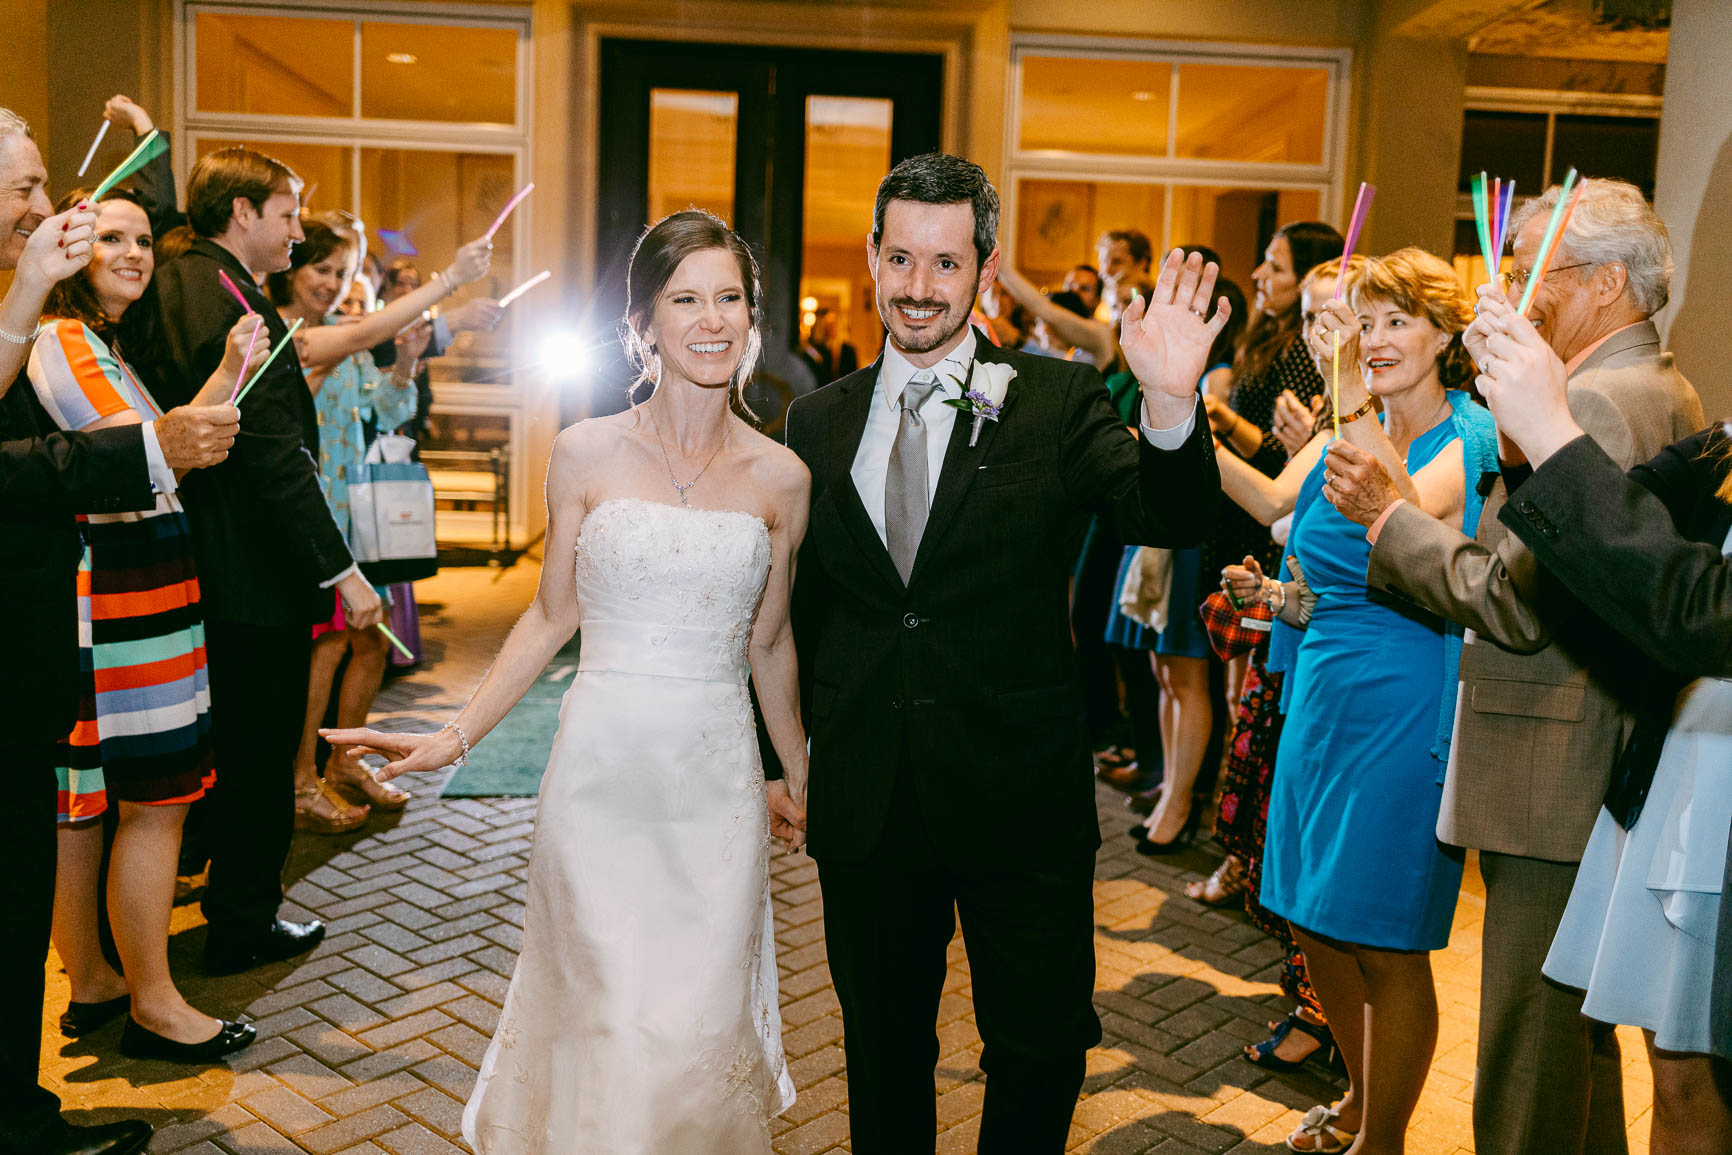 things to do as soon as you get engaged - lake norman peninsula club wedding by nhieu tang photography